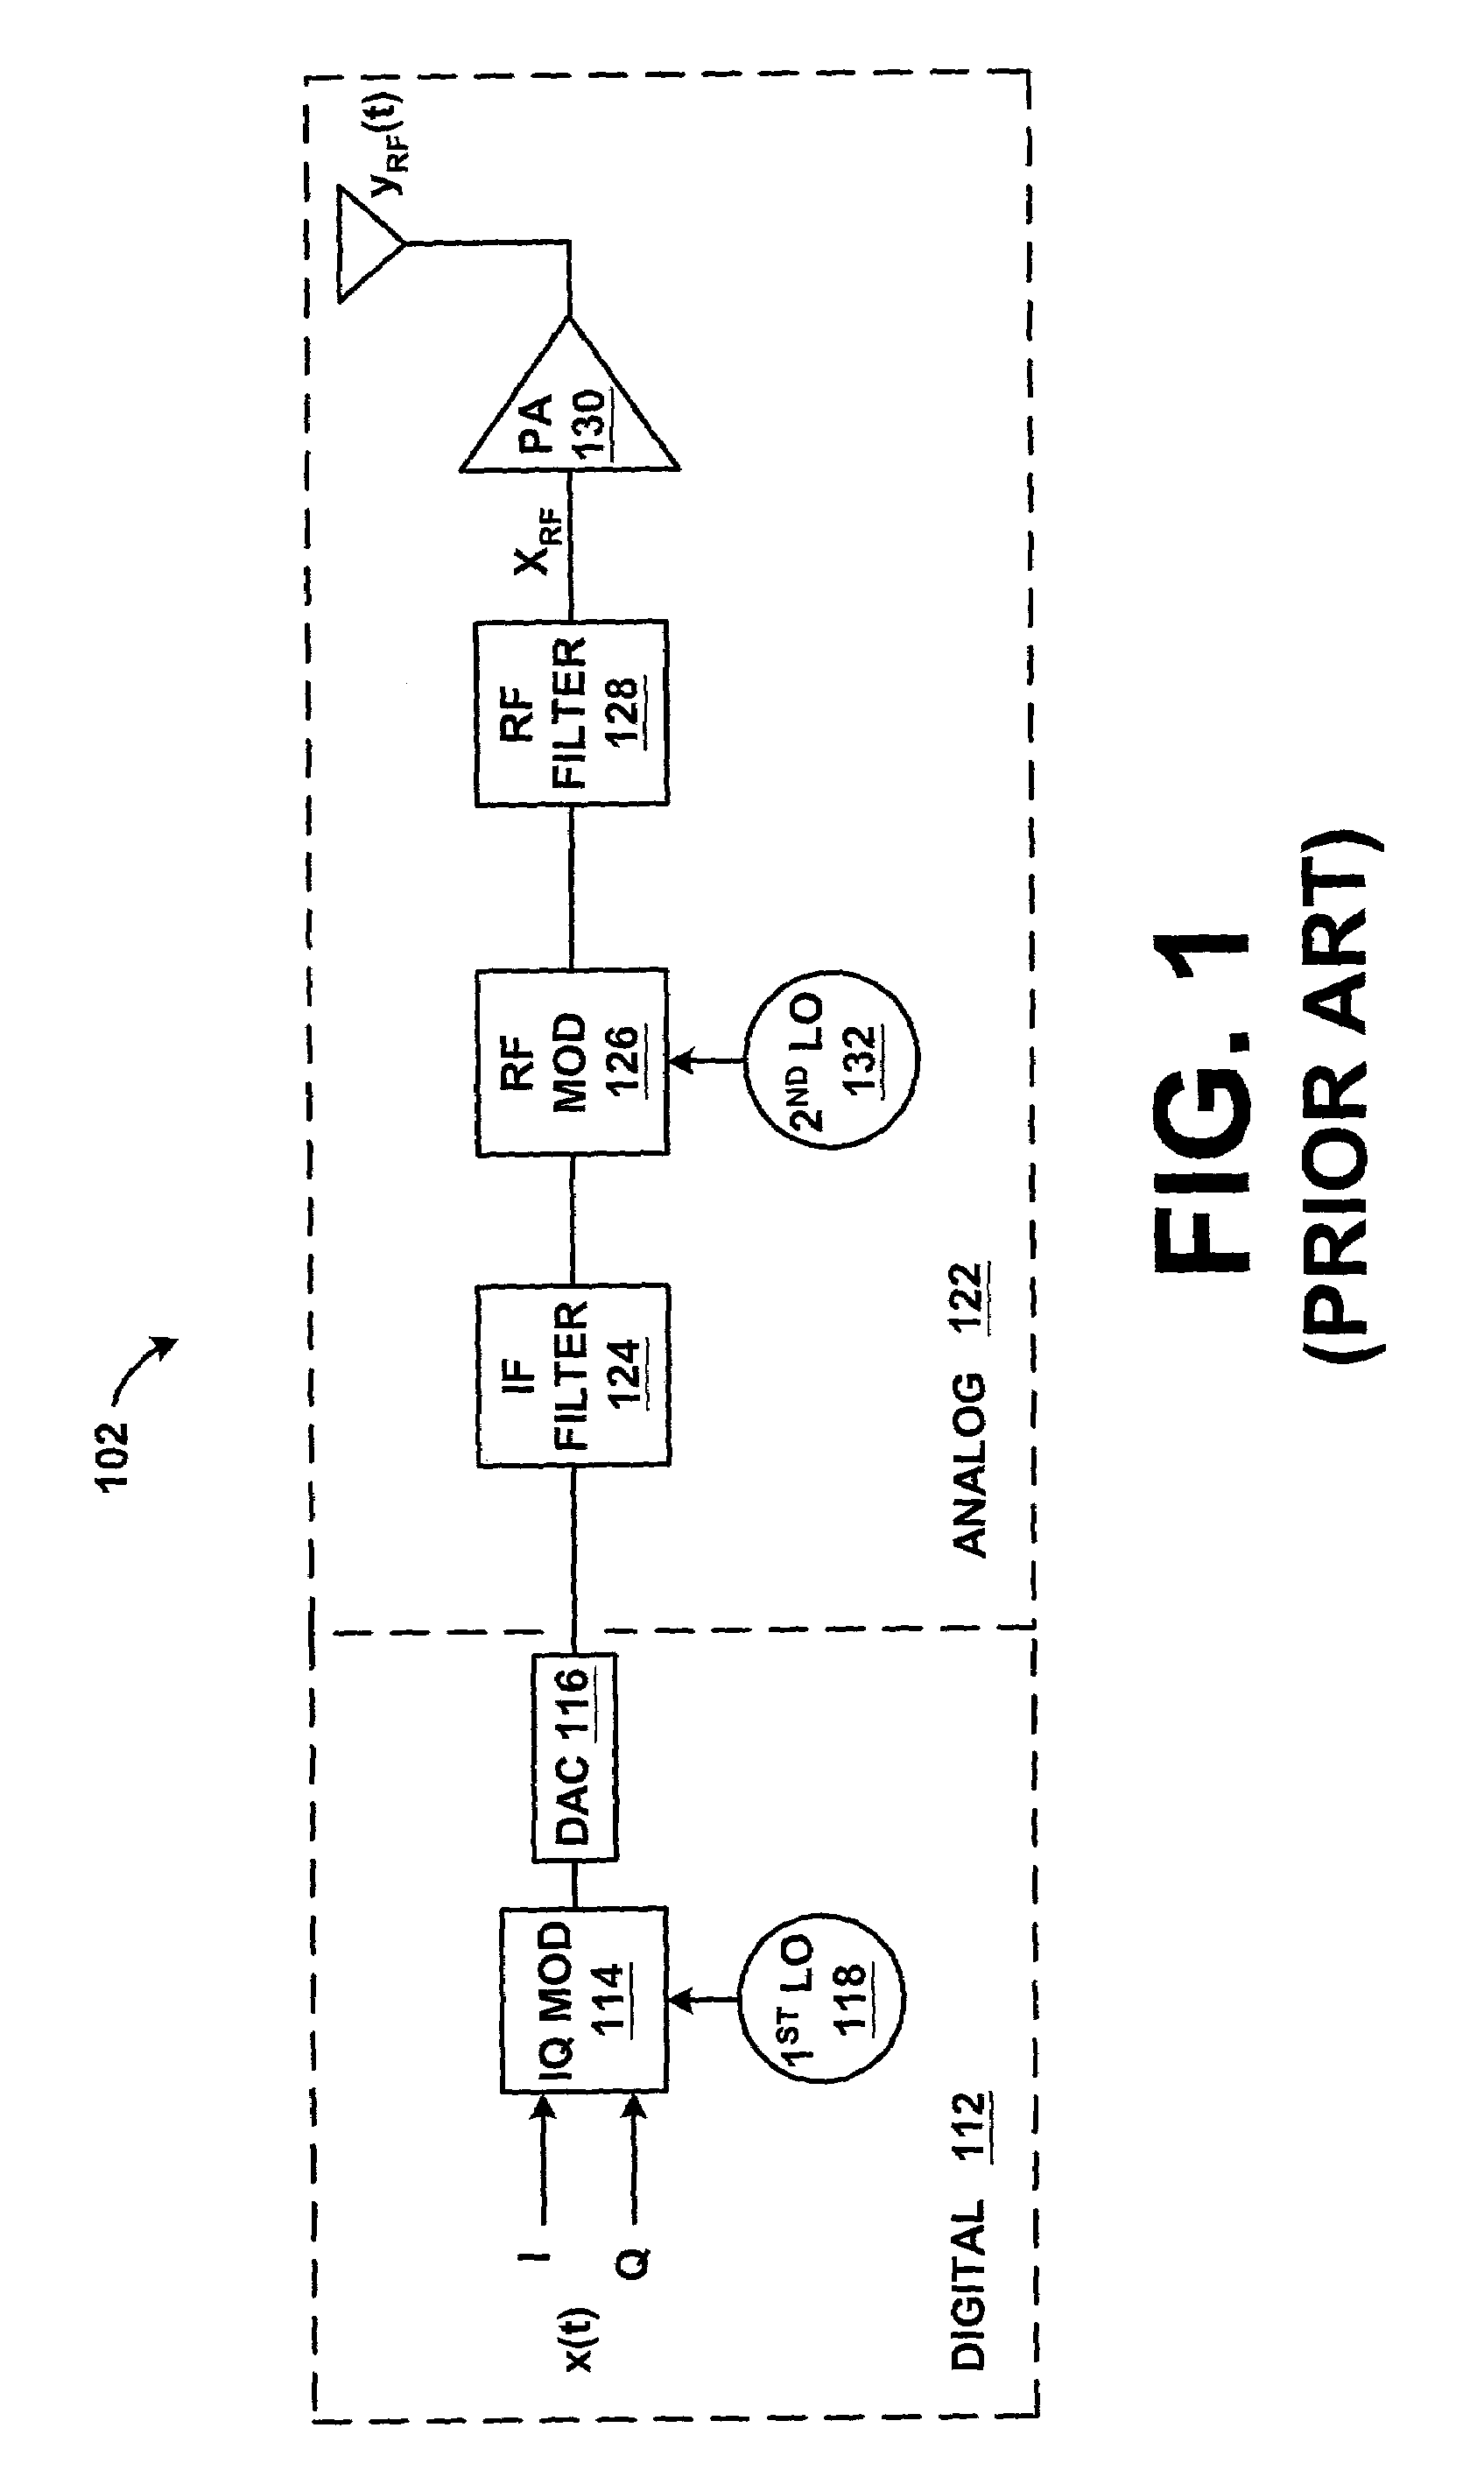 Systems and methods for providing baseband-derived predistortion to increase efficiency of transmitters